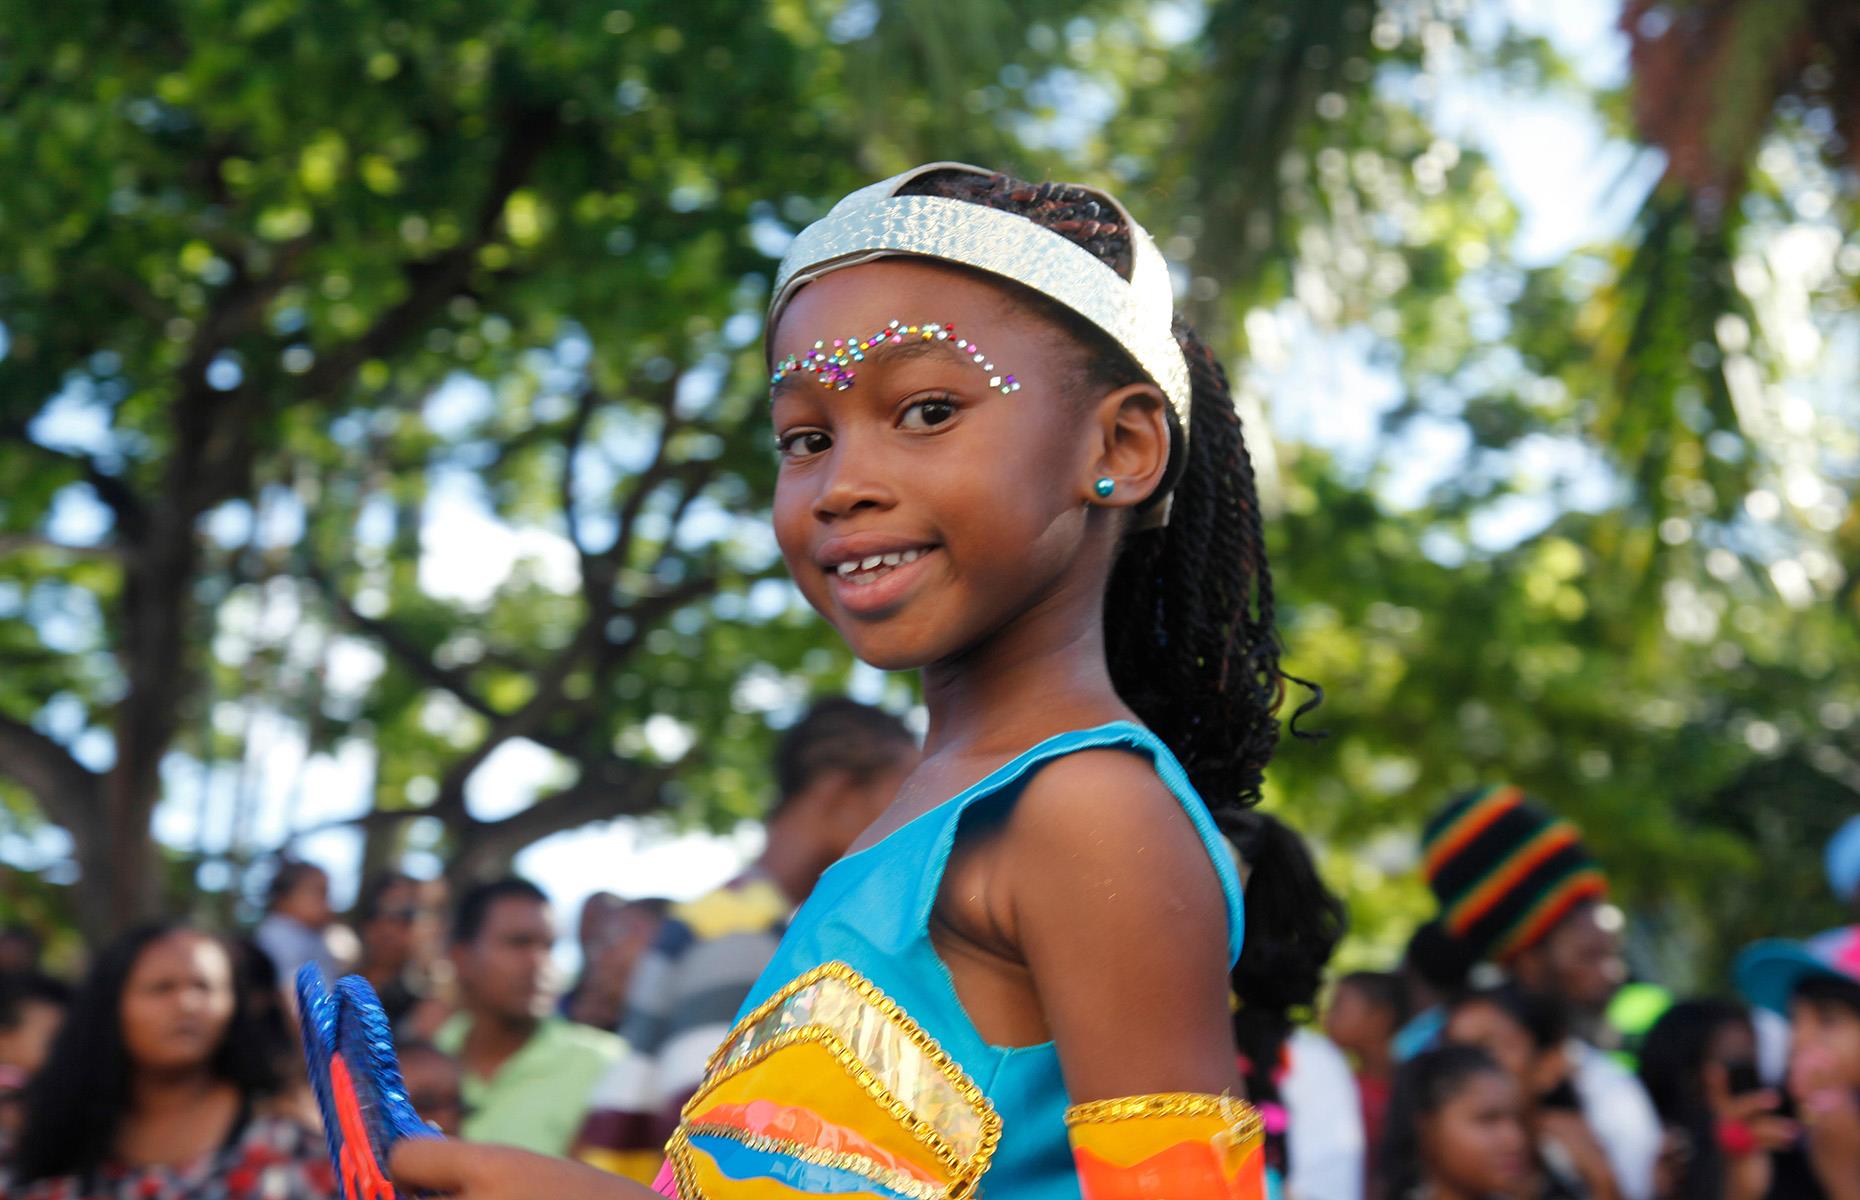 <p>Caribbean islands are famed for their eclectic array of local carnivals celebrated throughout the year, and Nevis’ iteration is <a href="https://www.facebook.com/NevisCulturamaFestival/">Culturama</a>: an annual celebration of Nevisian heritage. Taking place in late July or early August each year, the public holiday sees schools and businesses close, allowing everyone to get caught up in the fun. A flurry of music, parties, food fairs, dancing, poetry and pageants, one thing is guaranteed: the streets will be packed with revelers, as well as thousands of spectators from all around the world.</p>